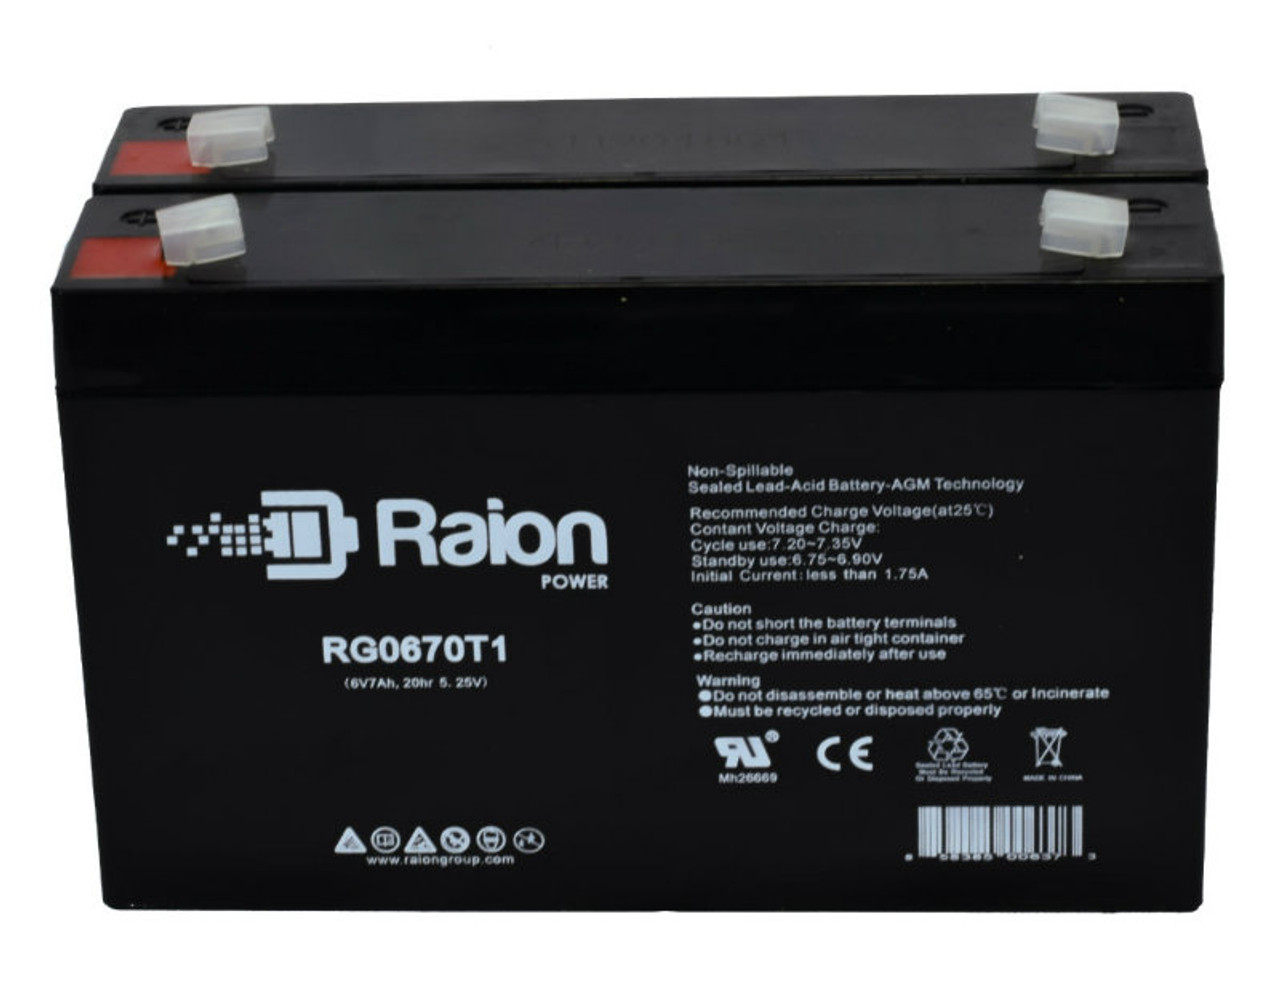 Raion Power RG0670T1 6V 7Ah Replacement Emergency Light Battery for Lithonia EMB3065501 - 2 Pack